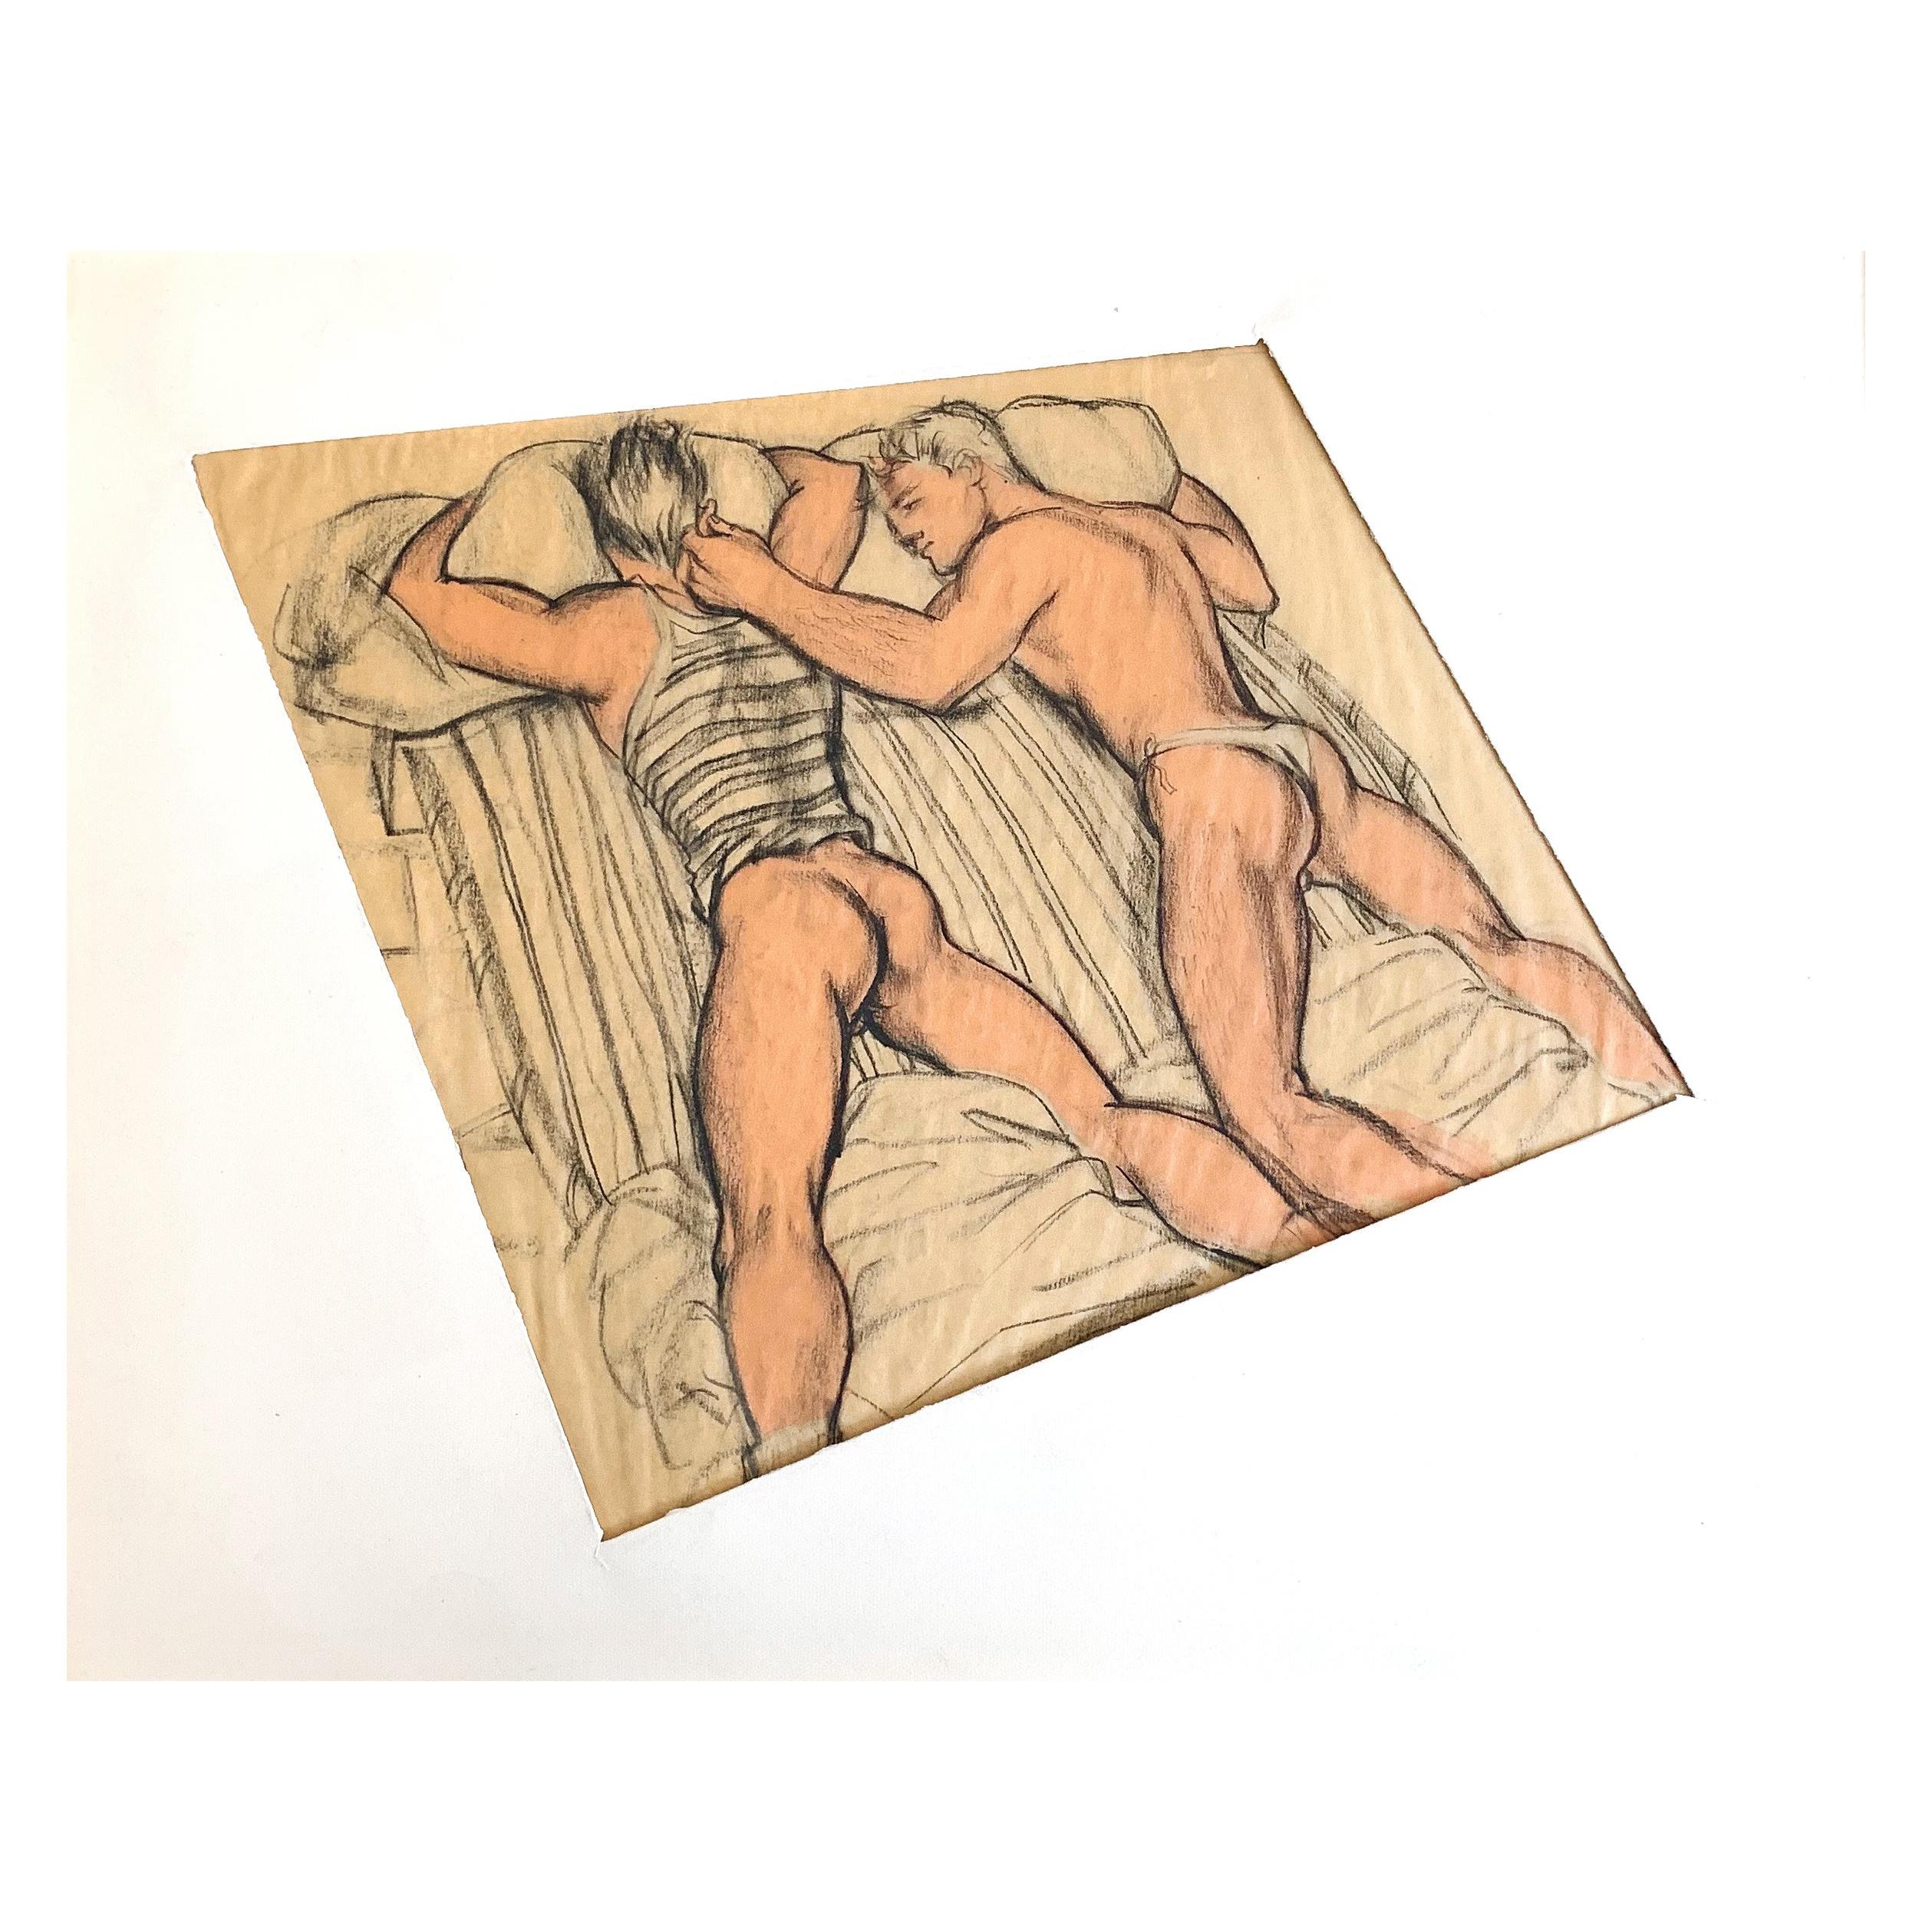 "Two Men in Bed, " Rare Depiction of Gay Male Intimacy in the 1950s, by de Knight